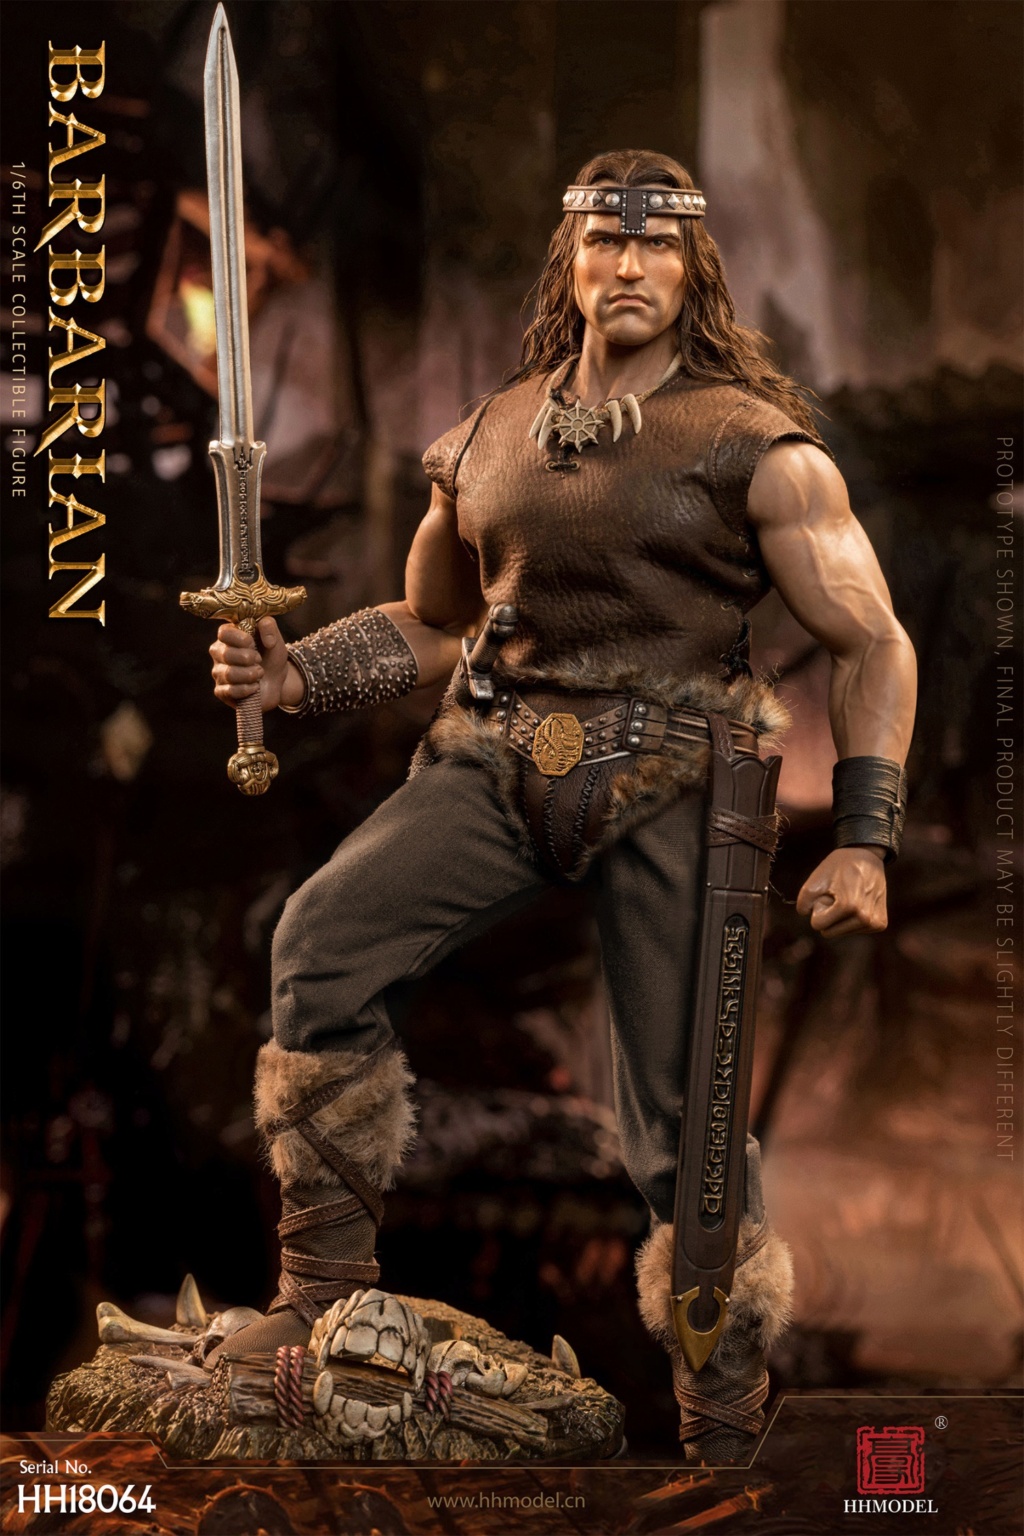 Fantasy - NEW PRODUCT: Haoyutoys: HH18064 1/6 Scale The Barbarian 18000810